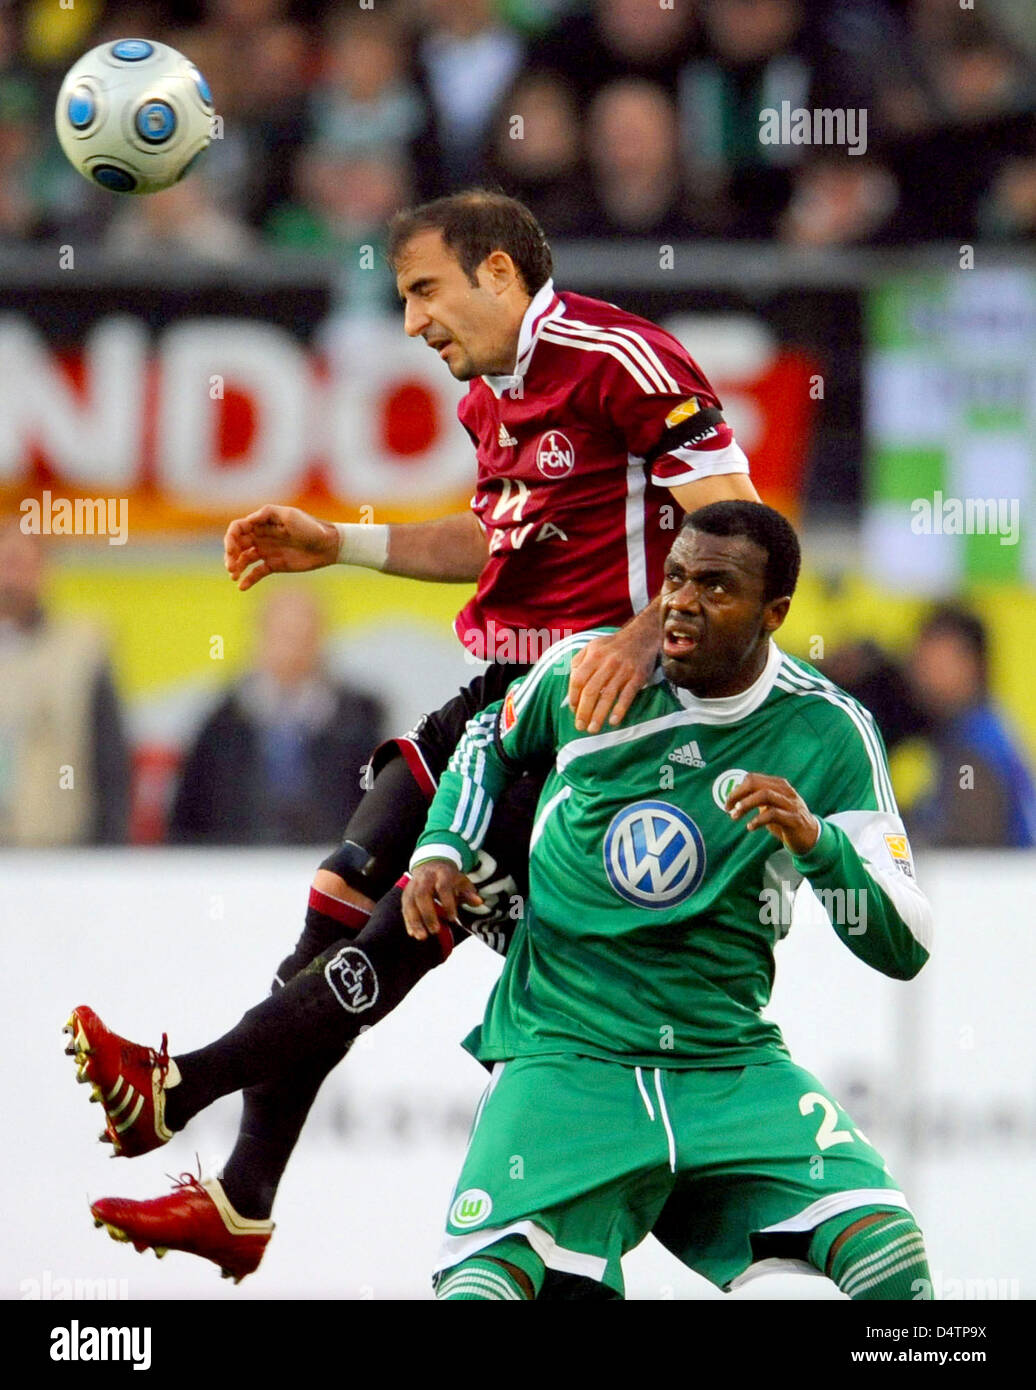 Wolfsburg?s Grafite (R) and Nuremberg?s Javier Horacio Pinola (L) vie for the header during the German Bundesliga soccer match VfL Wolfsburg vs FC Nuremberg at Volkswagen-Arena in Wolfsburg, Germany, 21 November 2009. Nuremberg won 2-3. Photo: PETER STEFFEN (ATTENTION: BLOCKING PERIOD! The DFL permits the further utilisation of the pictures in IPTV, mobile services and other new te Stock Photo